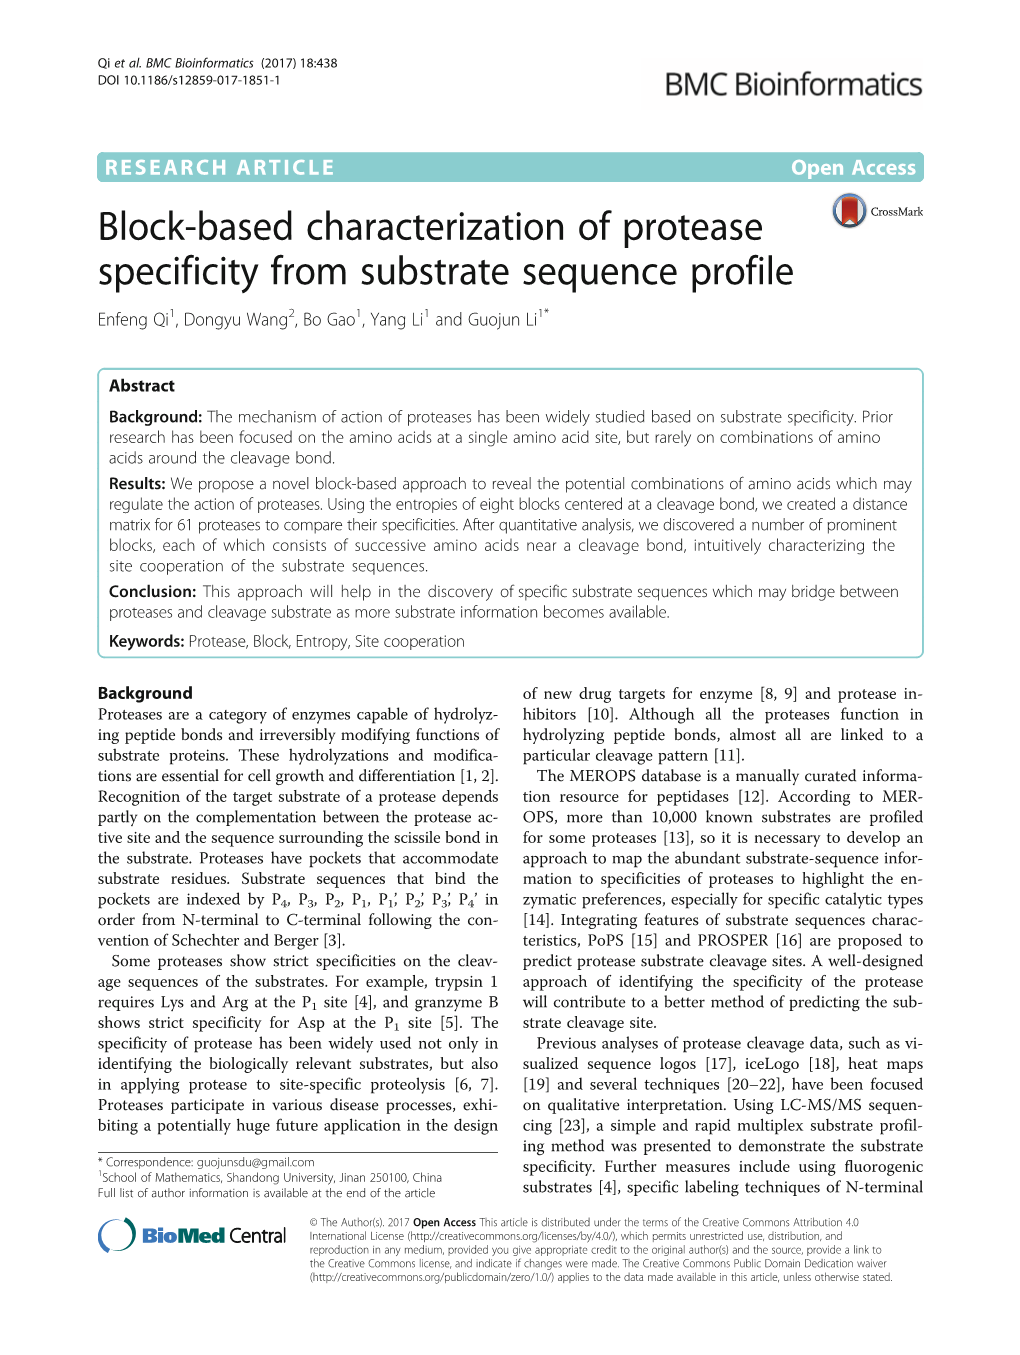 Block-Based Characterization of Protease Specificity from Substrate Sequence Profile Enfeng Qi1, Dongyu Wang2, Bo Gao1, Yang Li1 and Guojun Li1*